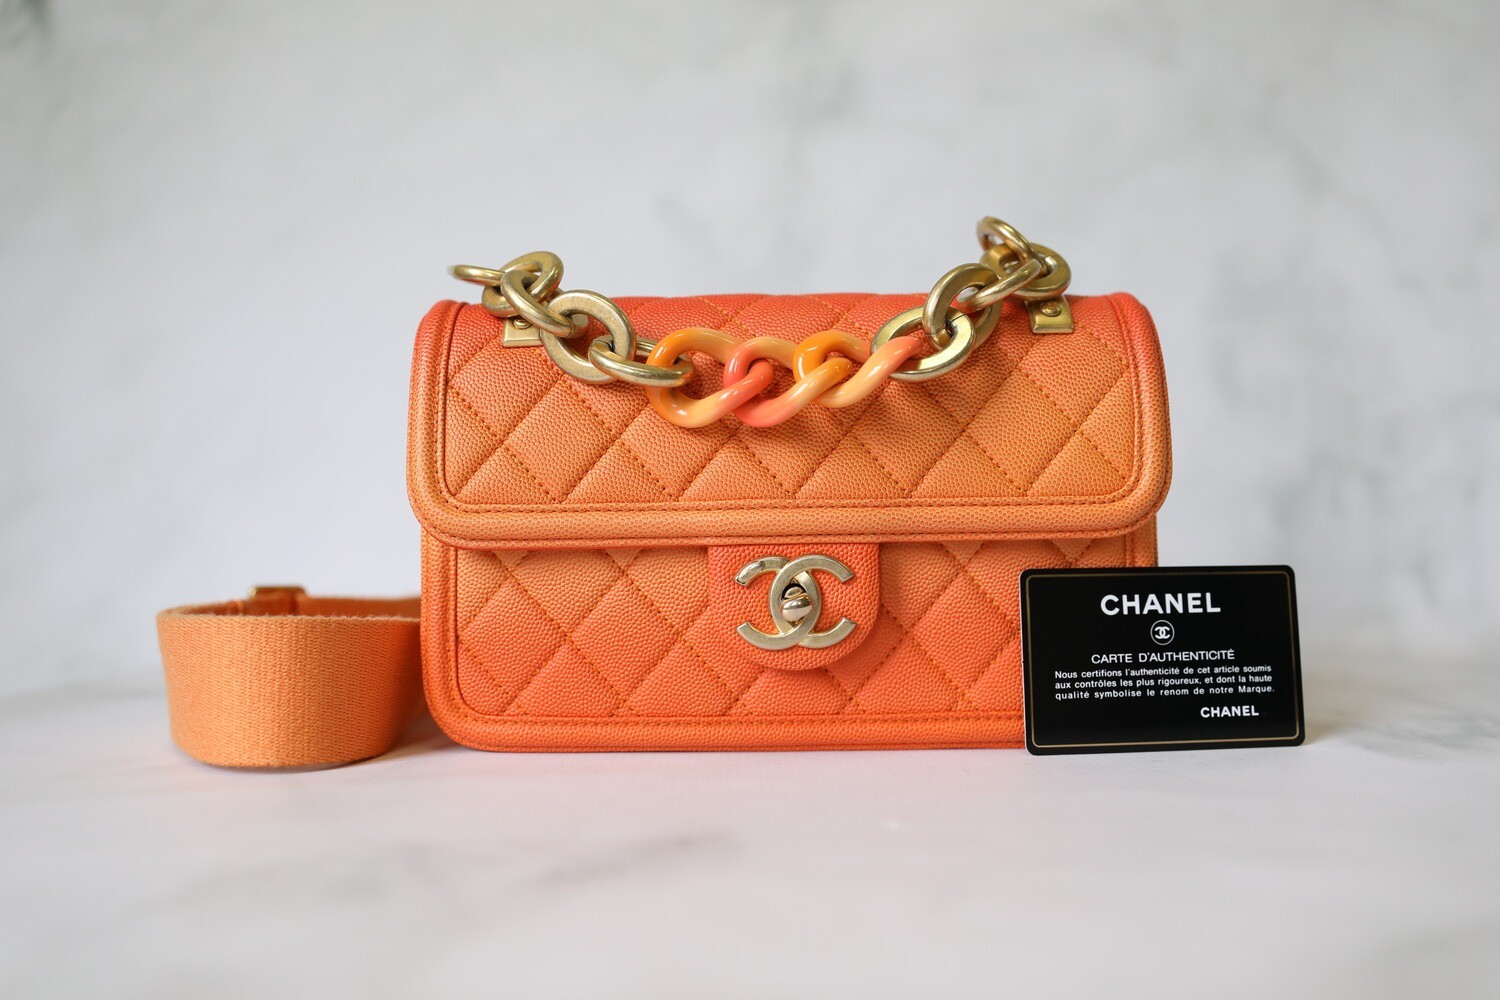 Chanel Beige Ombre Quilted Caviar Leather Sunset On The Sea Belt